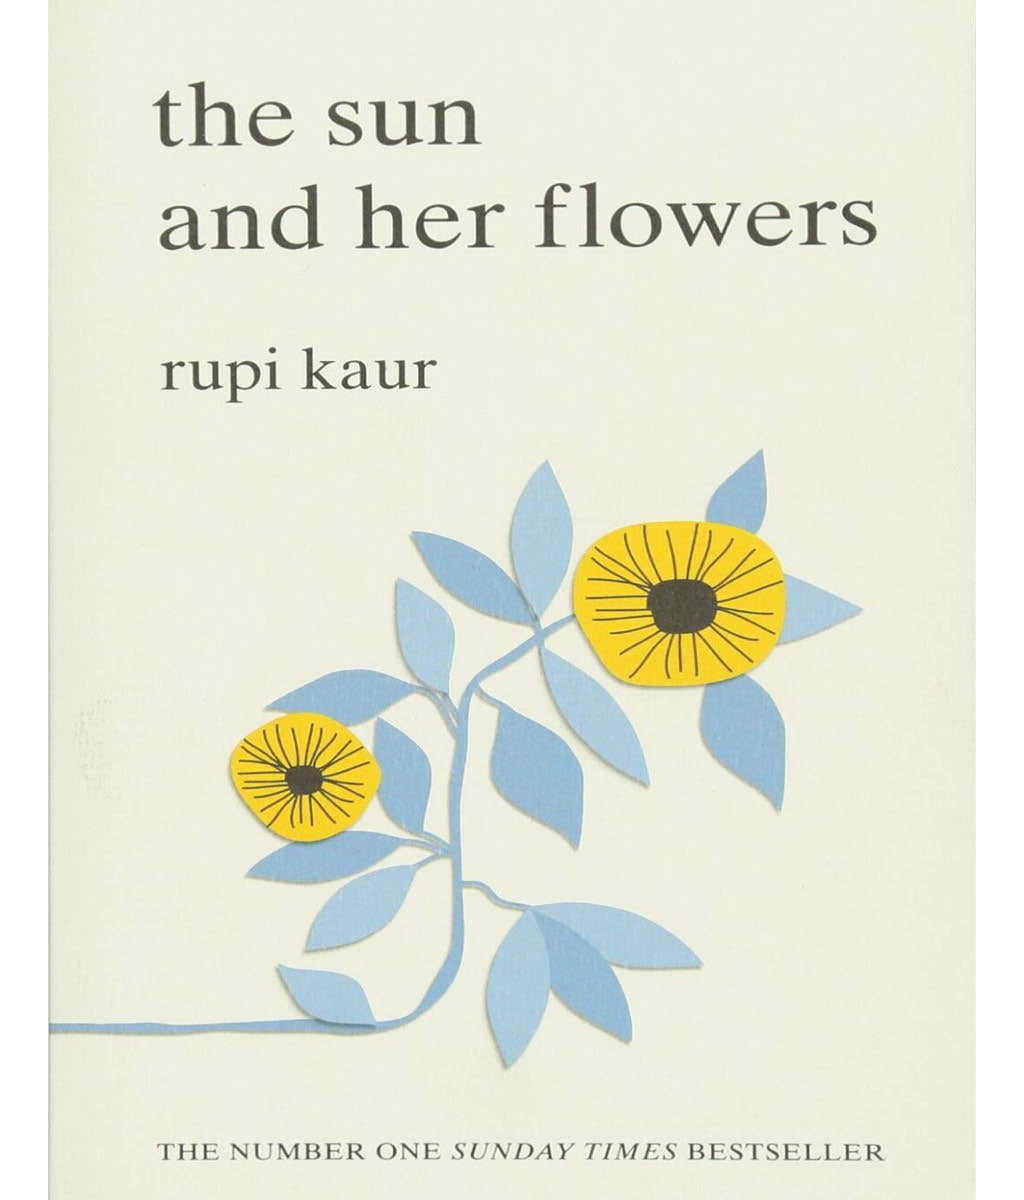 The Sun and Her Flowers Rupi Kaur